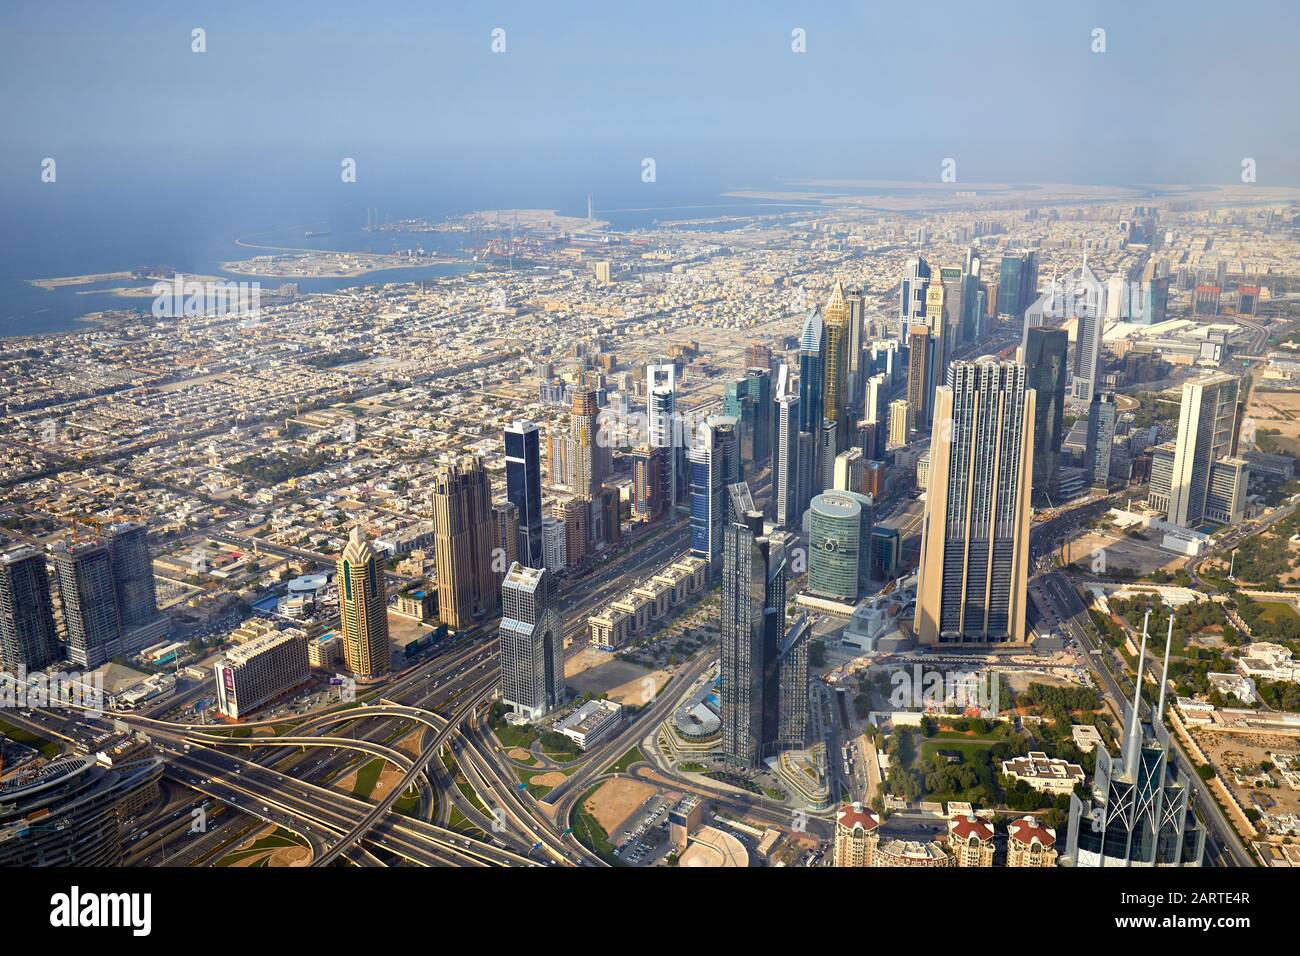 DUBAI, UNITED ARAB EMIRATES - NOVEMBER 19, 2019: Sheikh Zayed Road and Dubai city aerial view with modern skyscrapers in a sunny day, blue sky Stock Photo